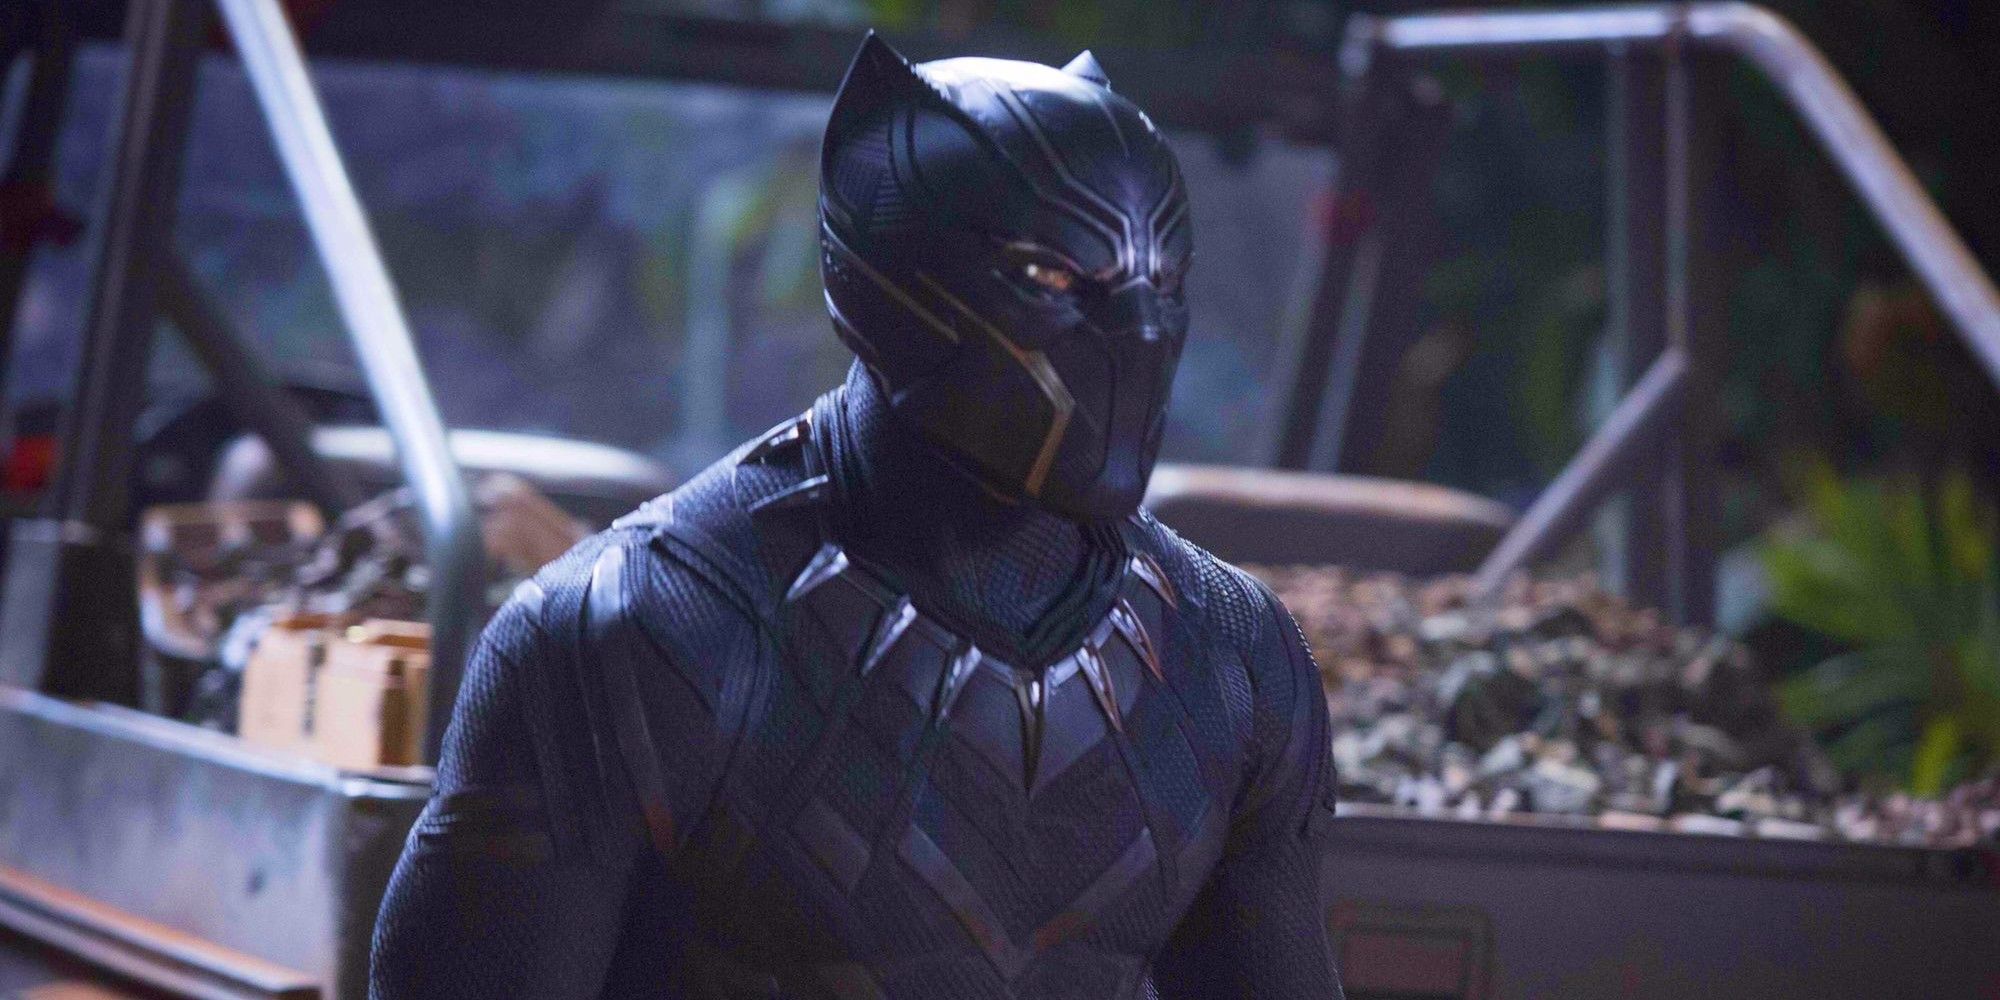 King T'Challa dressed as Black Panther